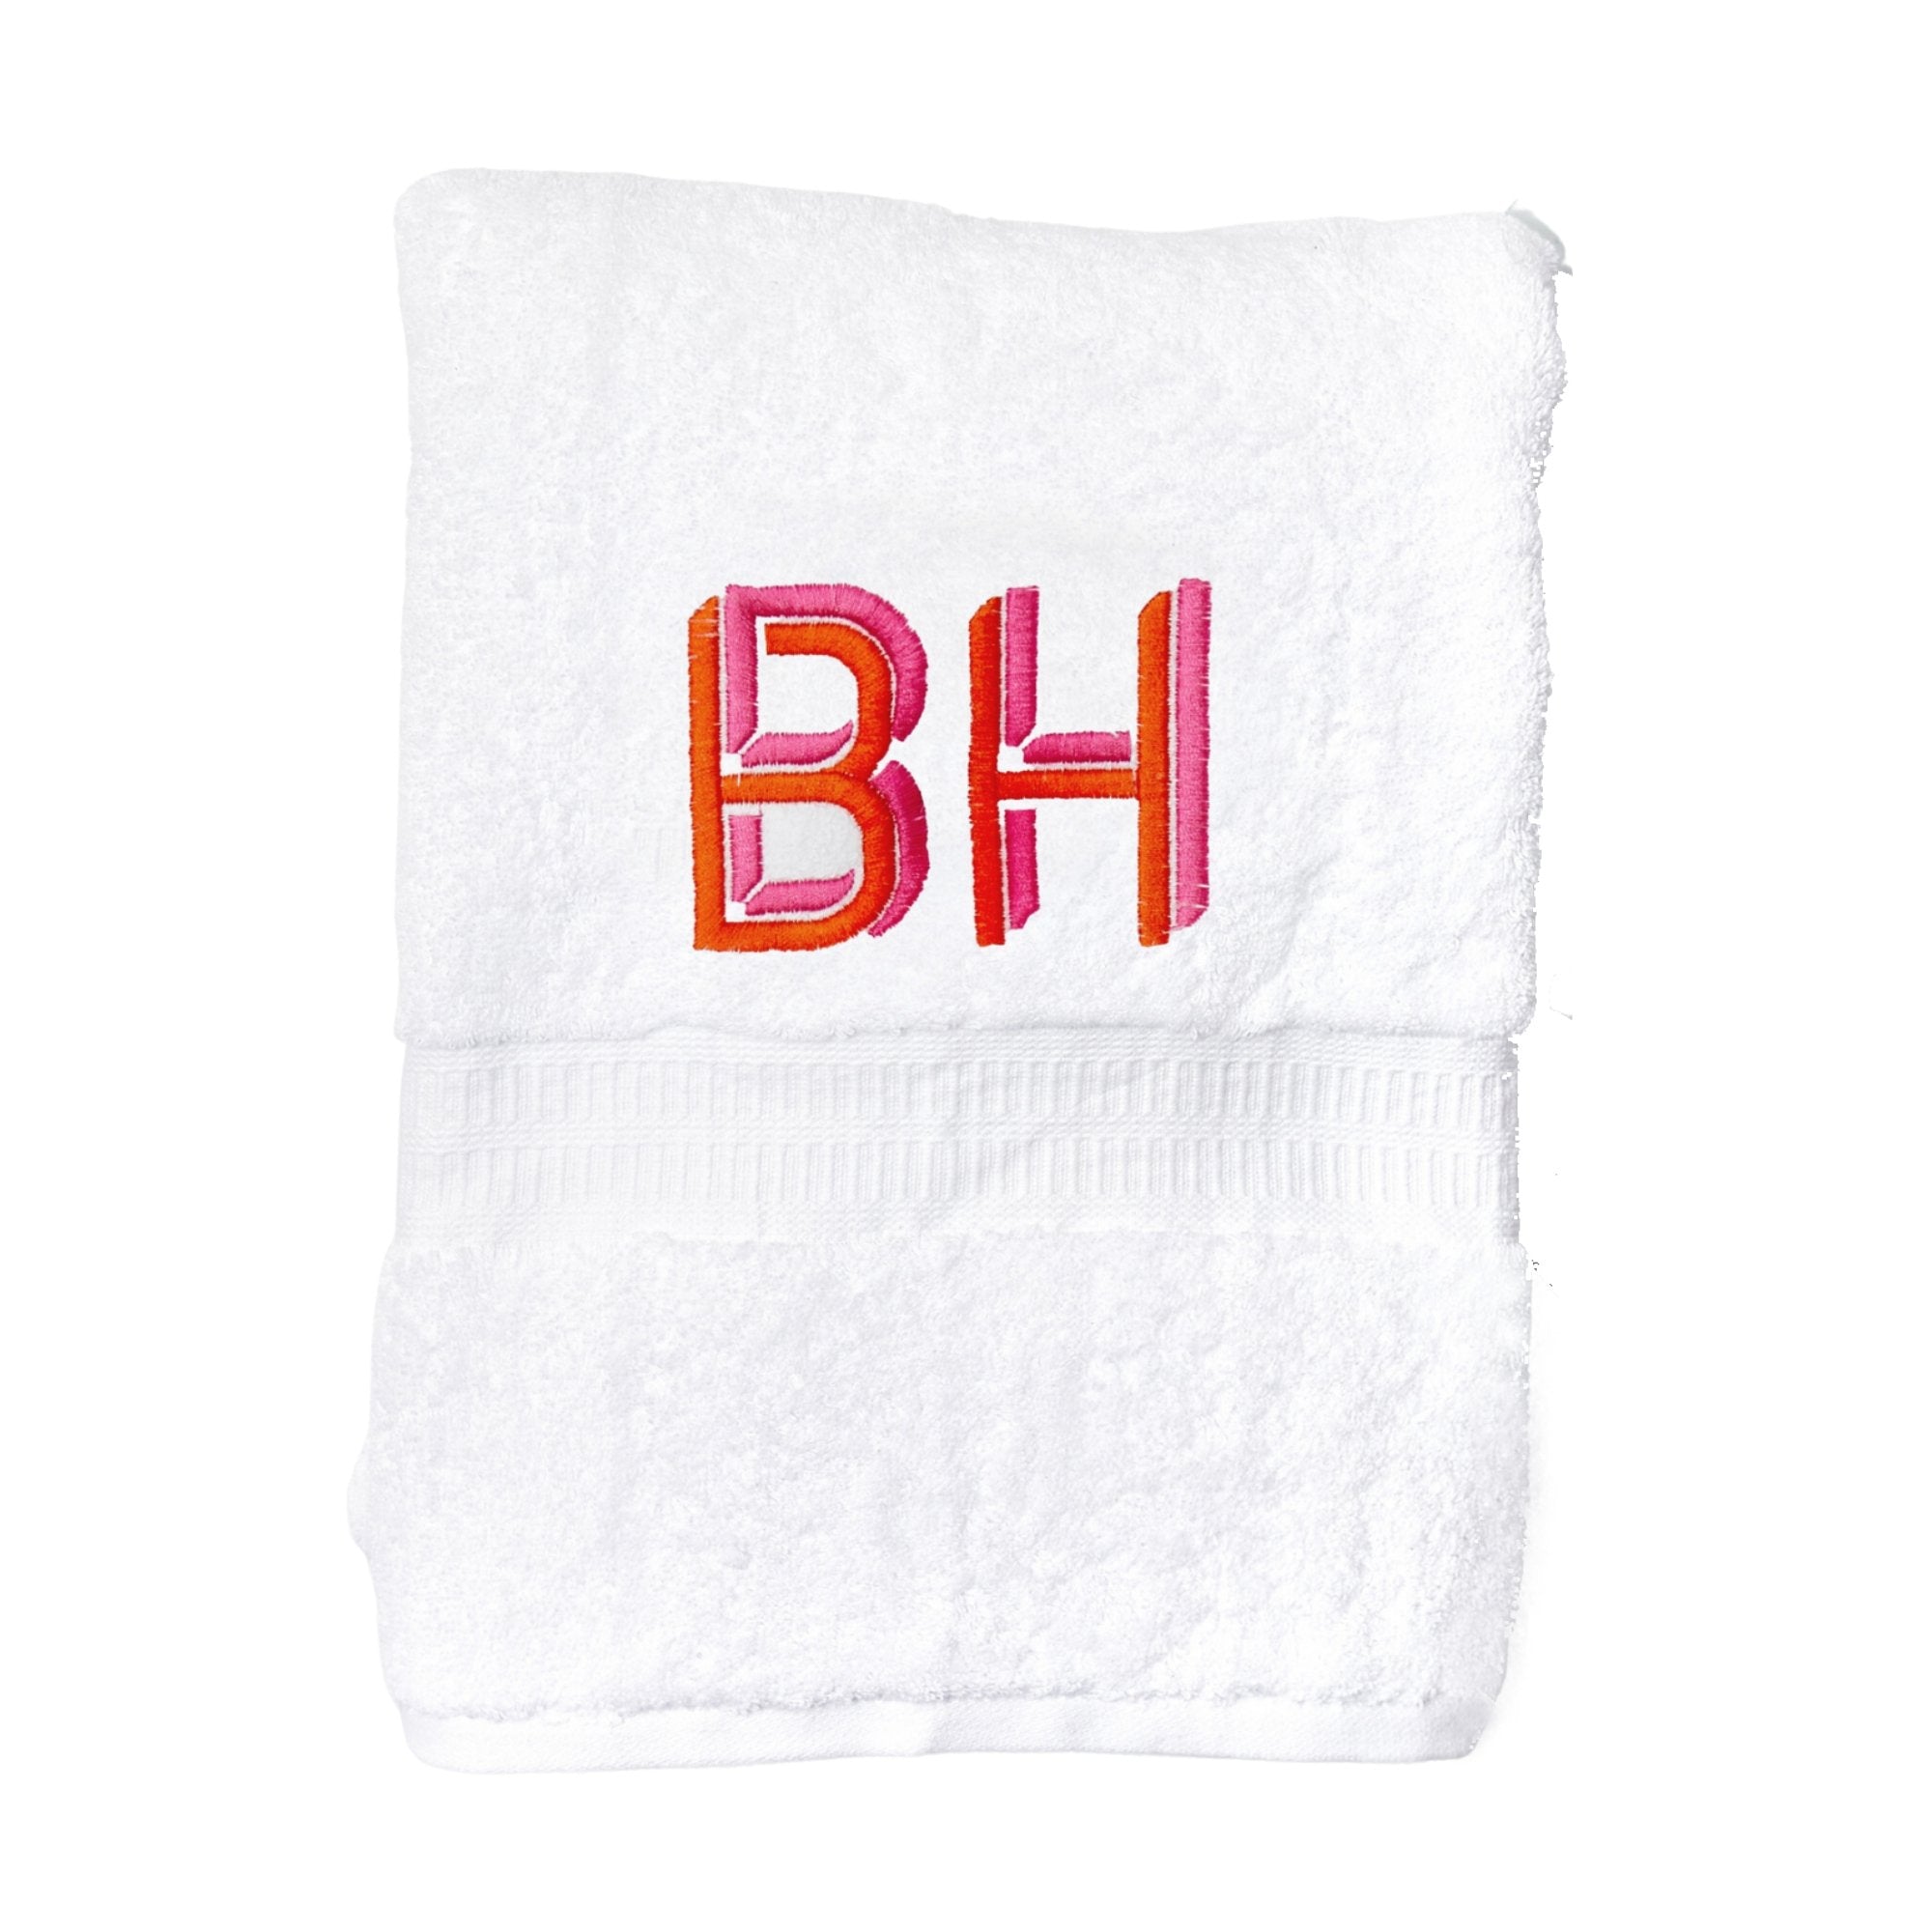 A white guest towel with "BH" embroidered in pink and orange